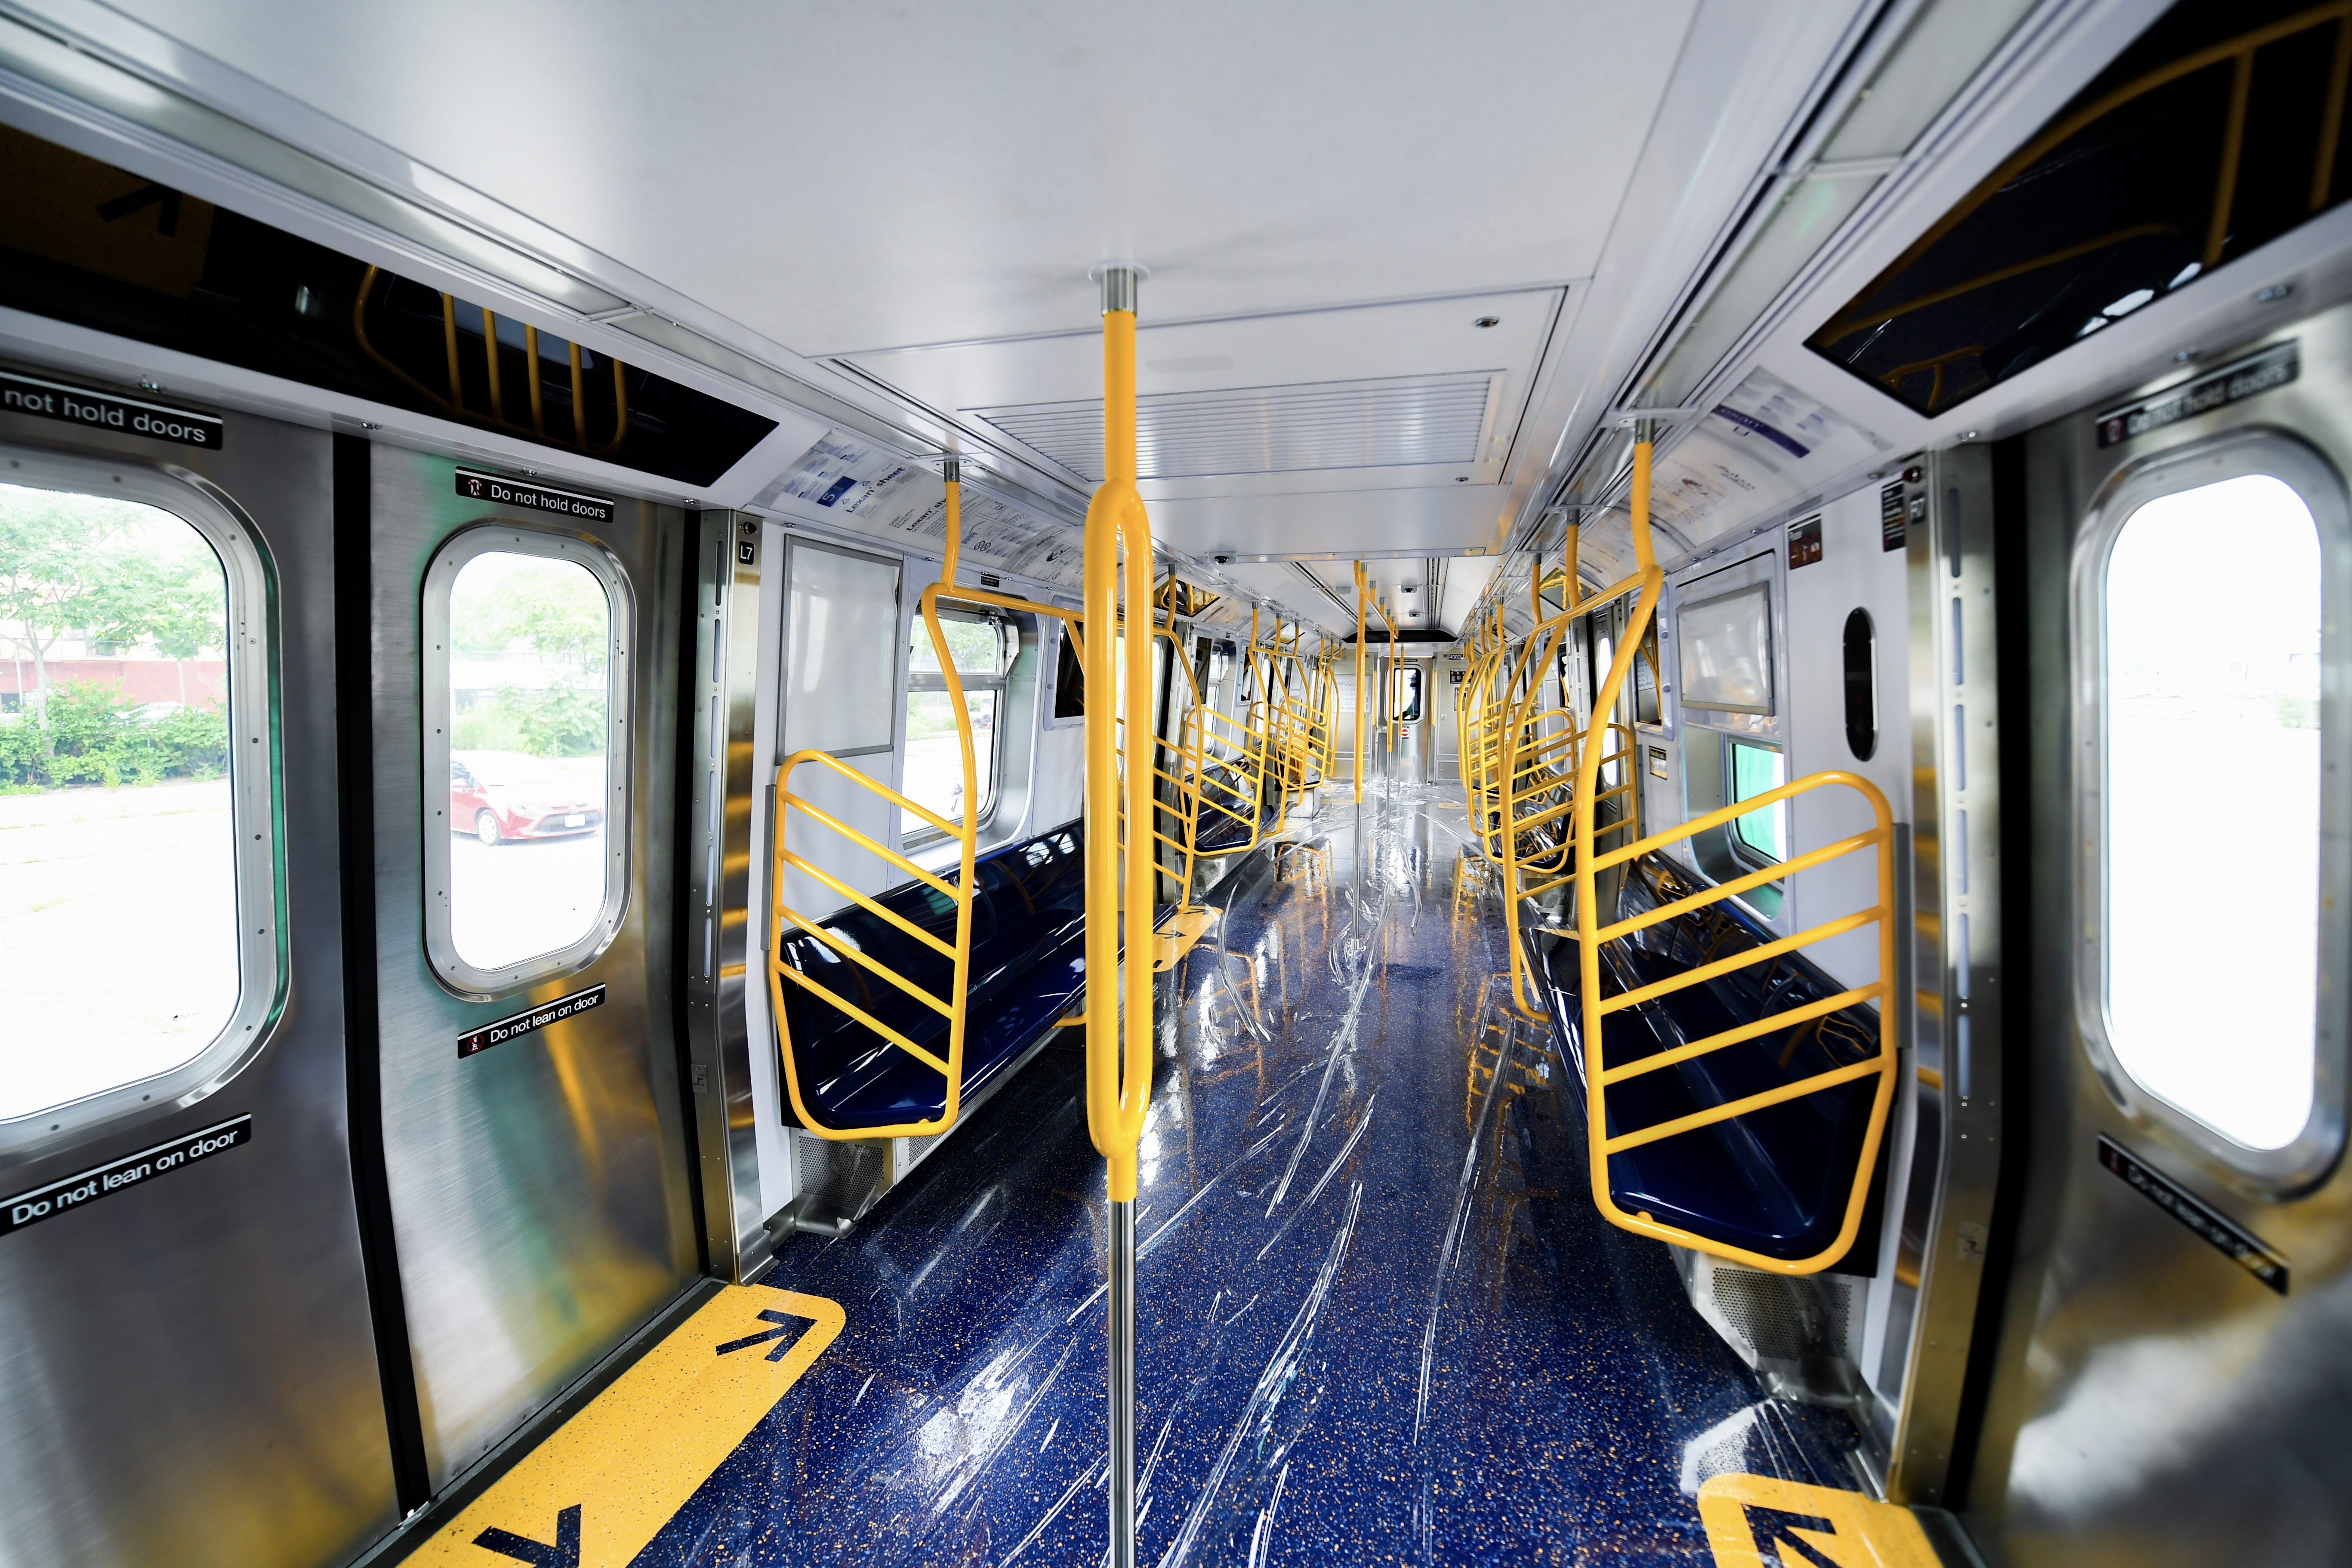 MTA New York City Transit unveils the first of five new R-211 subway cars at the South Brooklyn Interchange Yard on Thu., July 1, 2021.